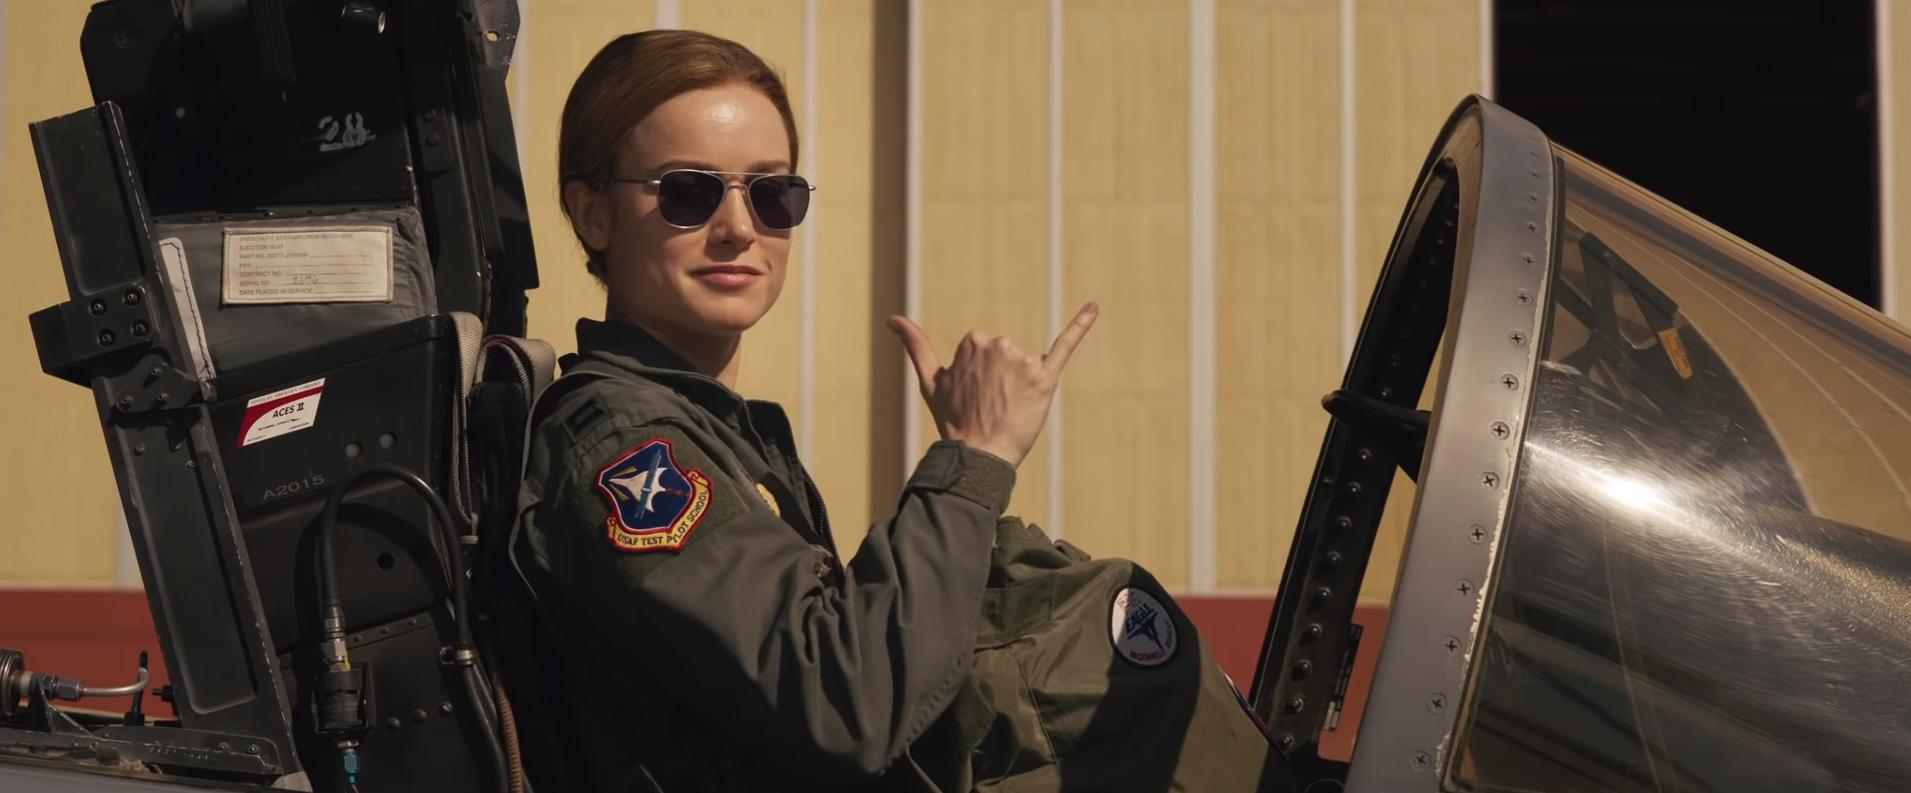 Brie Larson playing Captain Marvel in the MCU.